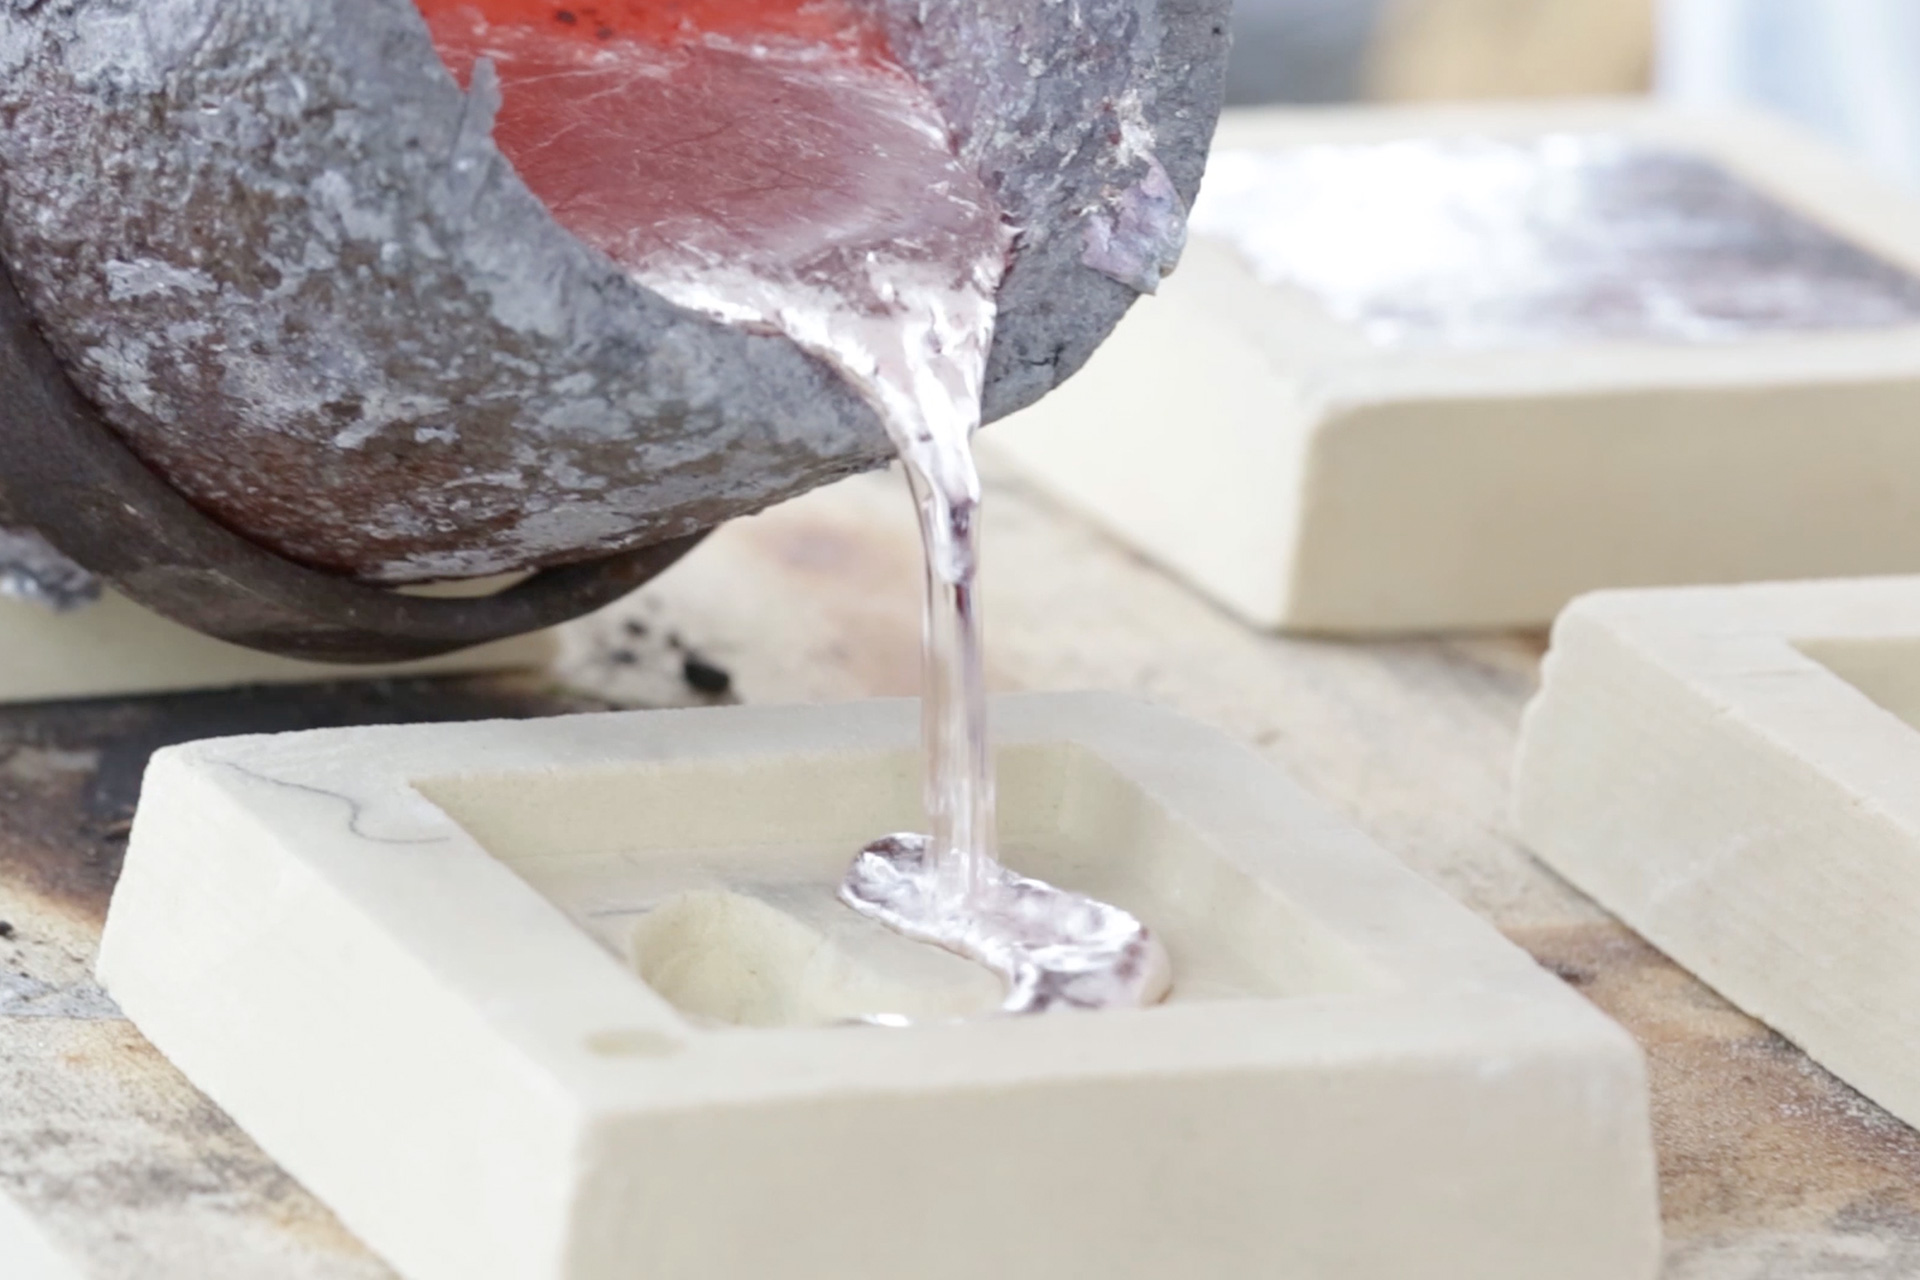 Still of the aluminum pouring from the Breaking Ground event.